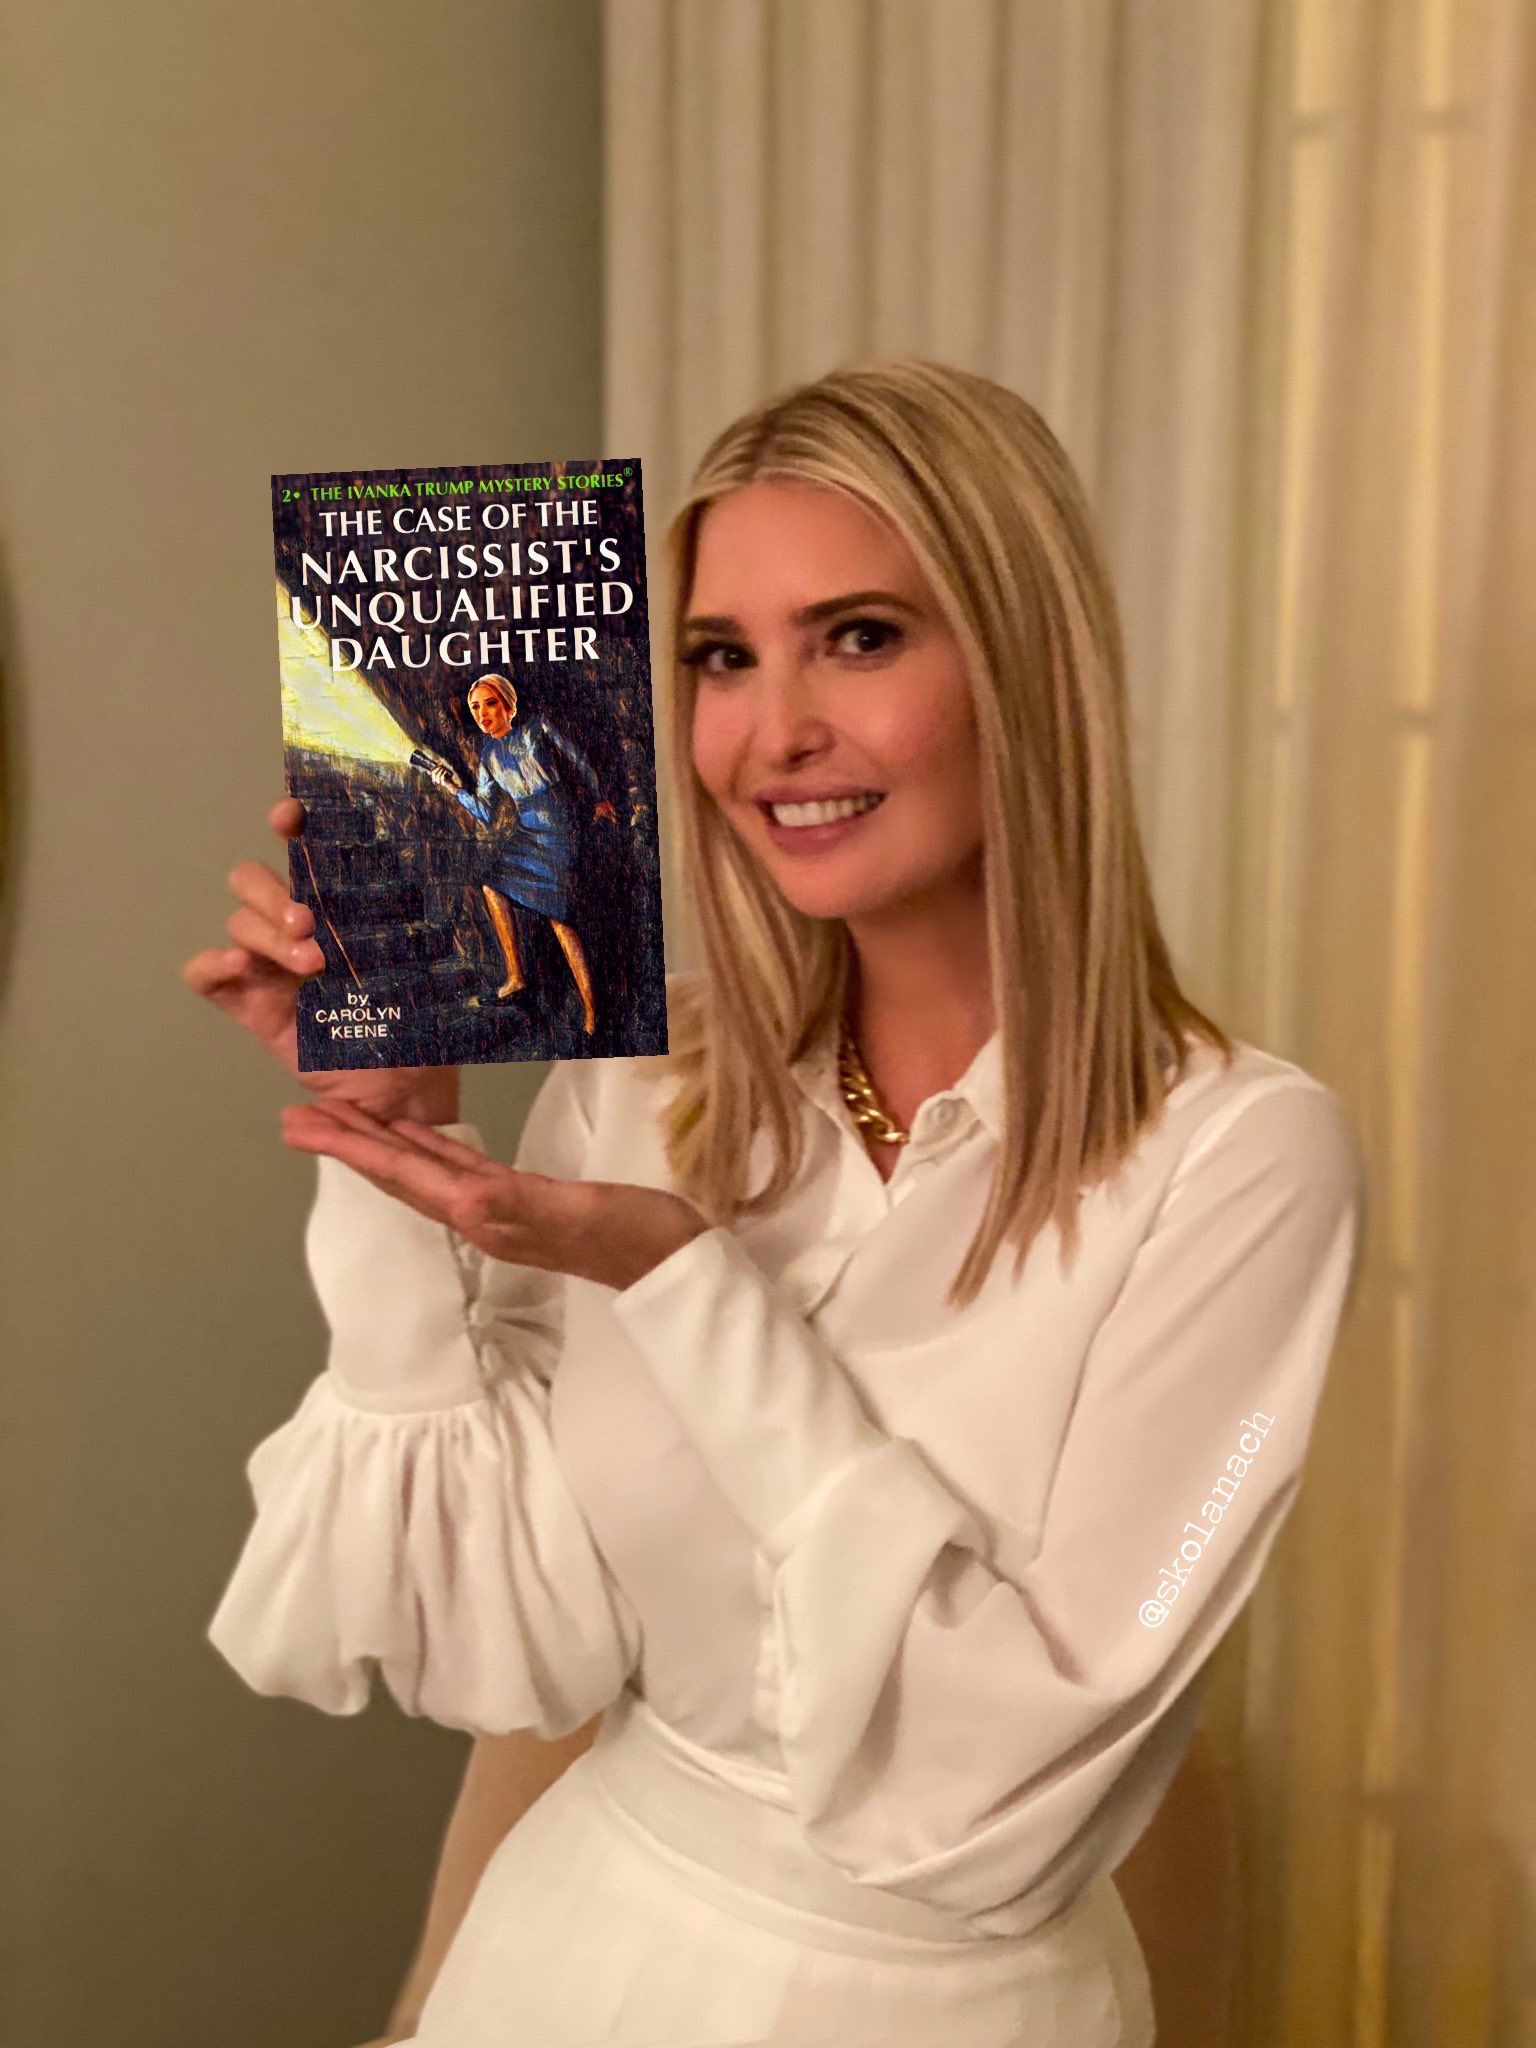 blond - 2 The Ivanka Trump Mystery Stories The Case Of The Narcissist'S Unqualified Daughter by Carolyn Keene